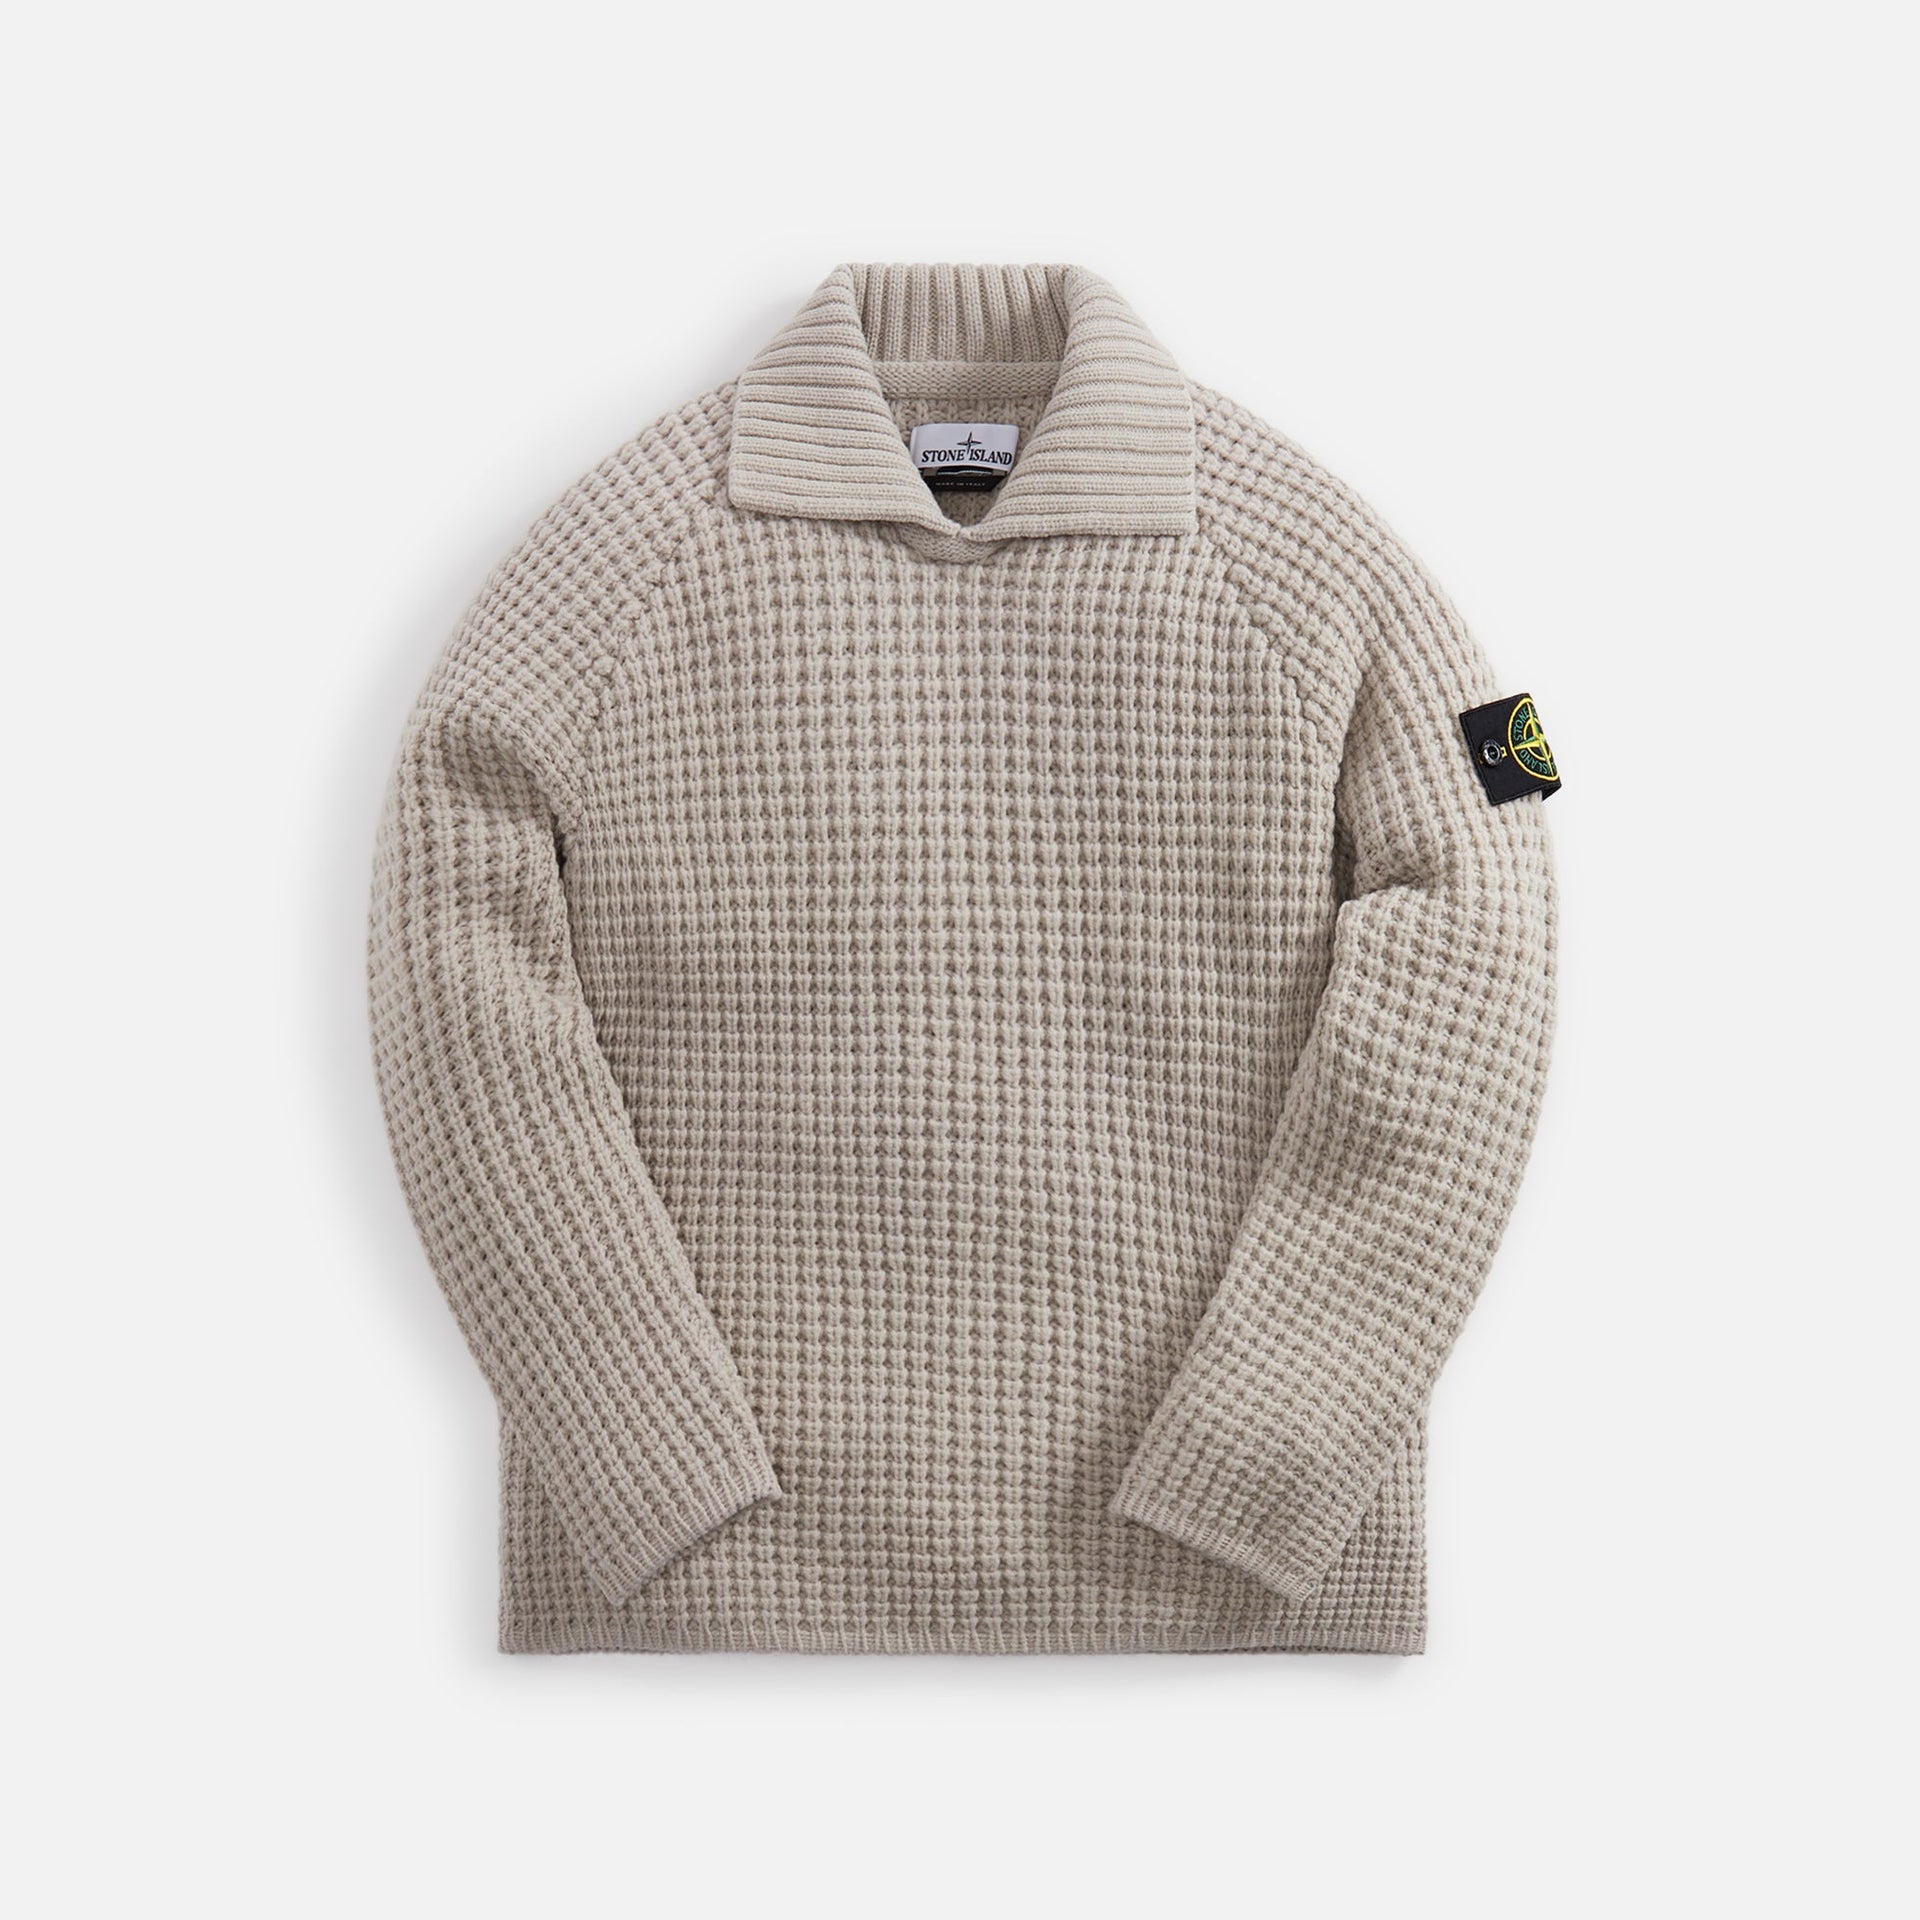 Stone Island President's Knit Pure Wool Knit Polo - Plaster